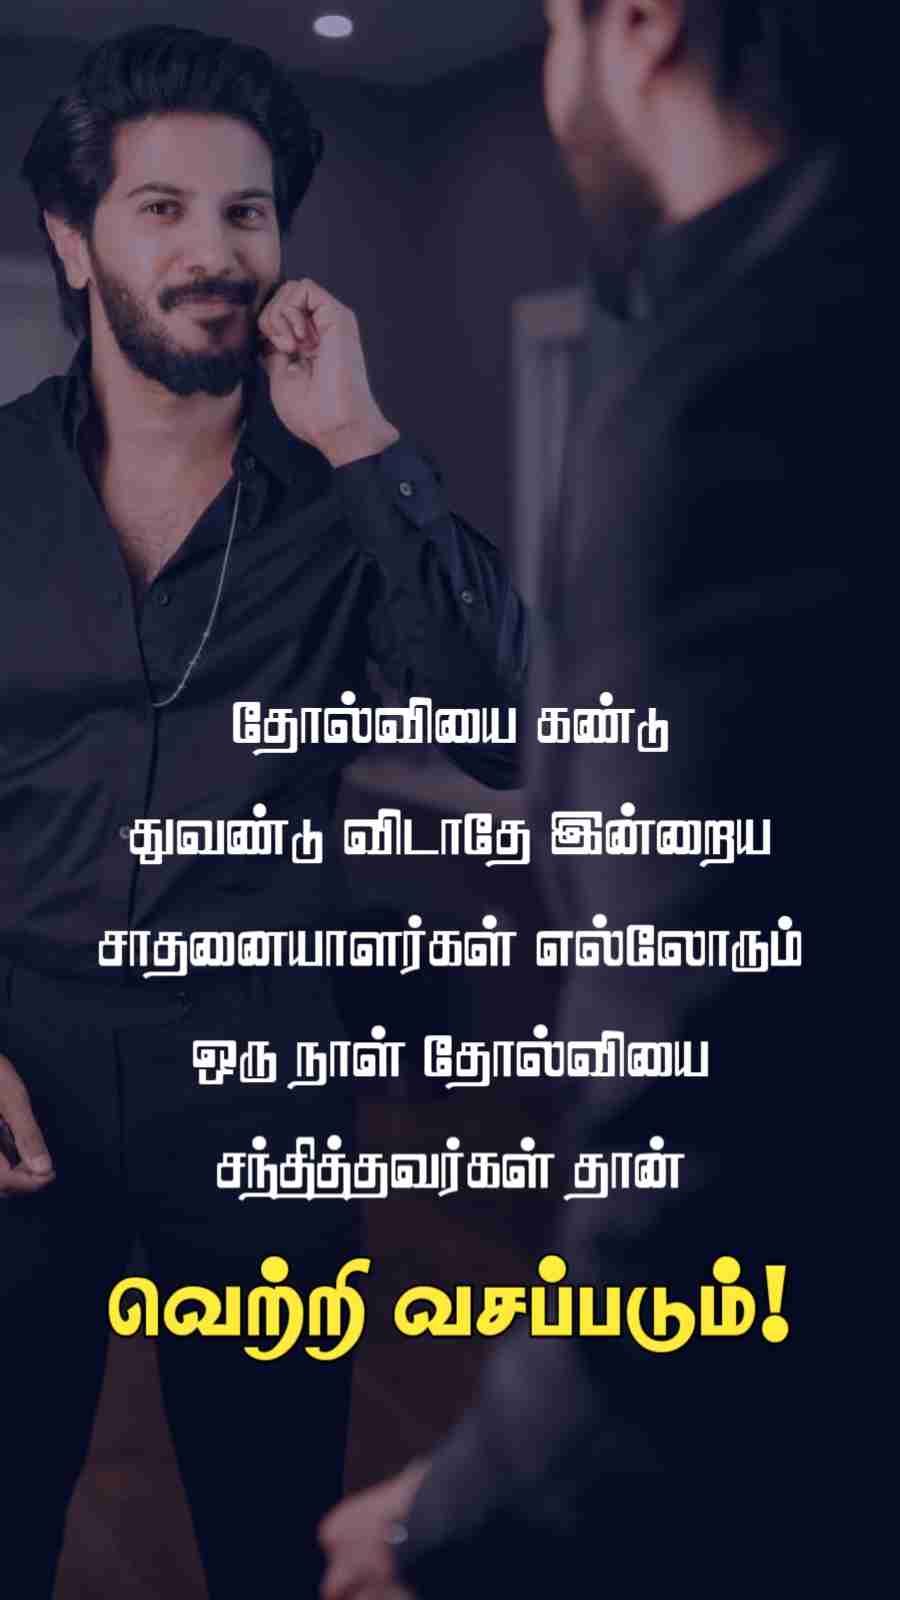 Tamil-Motivational-Quotes